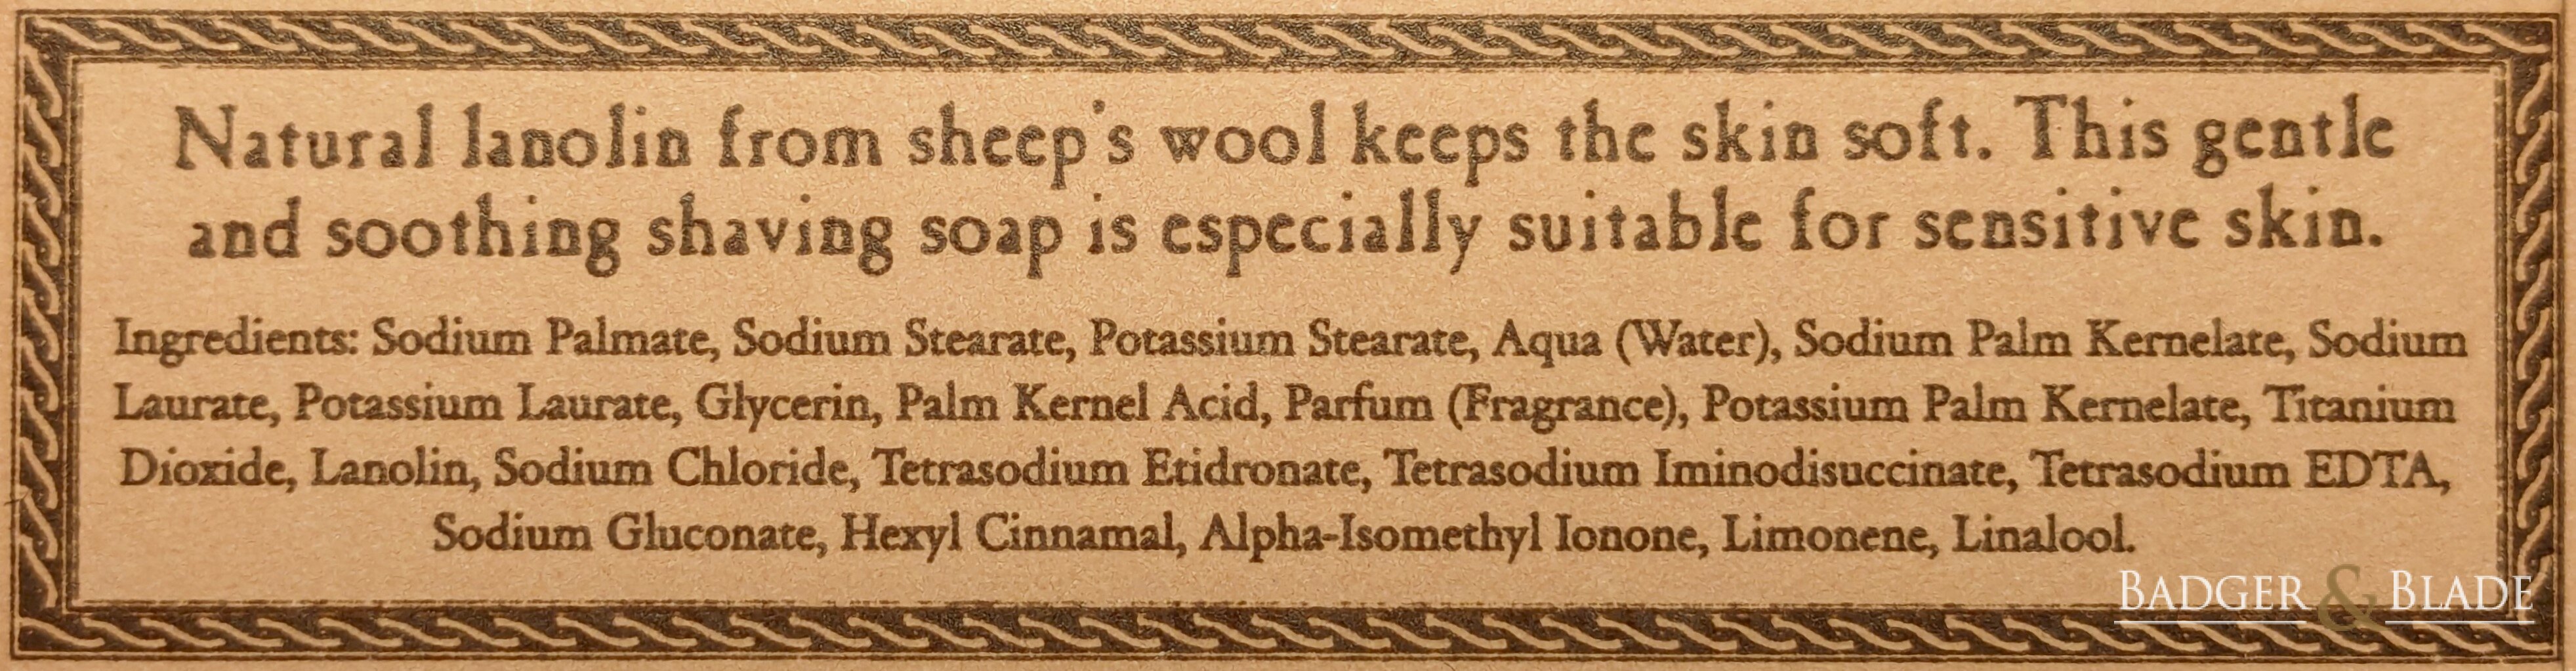 Mitchell's Wool Fat - Refill Ingredients